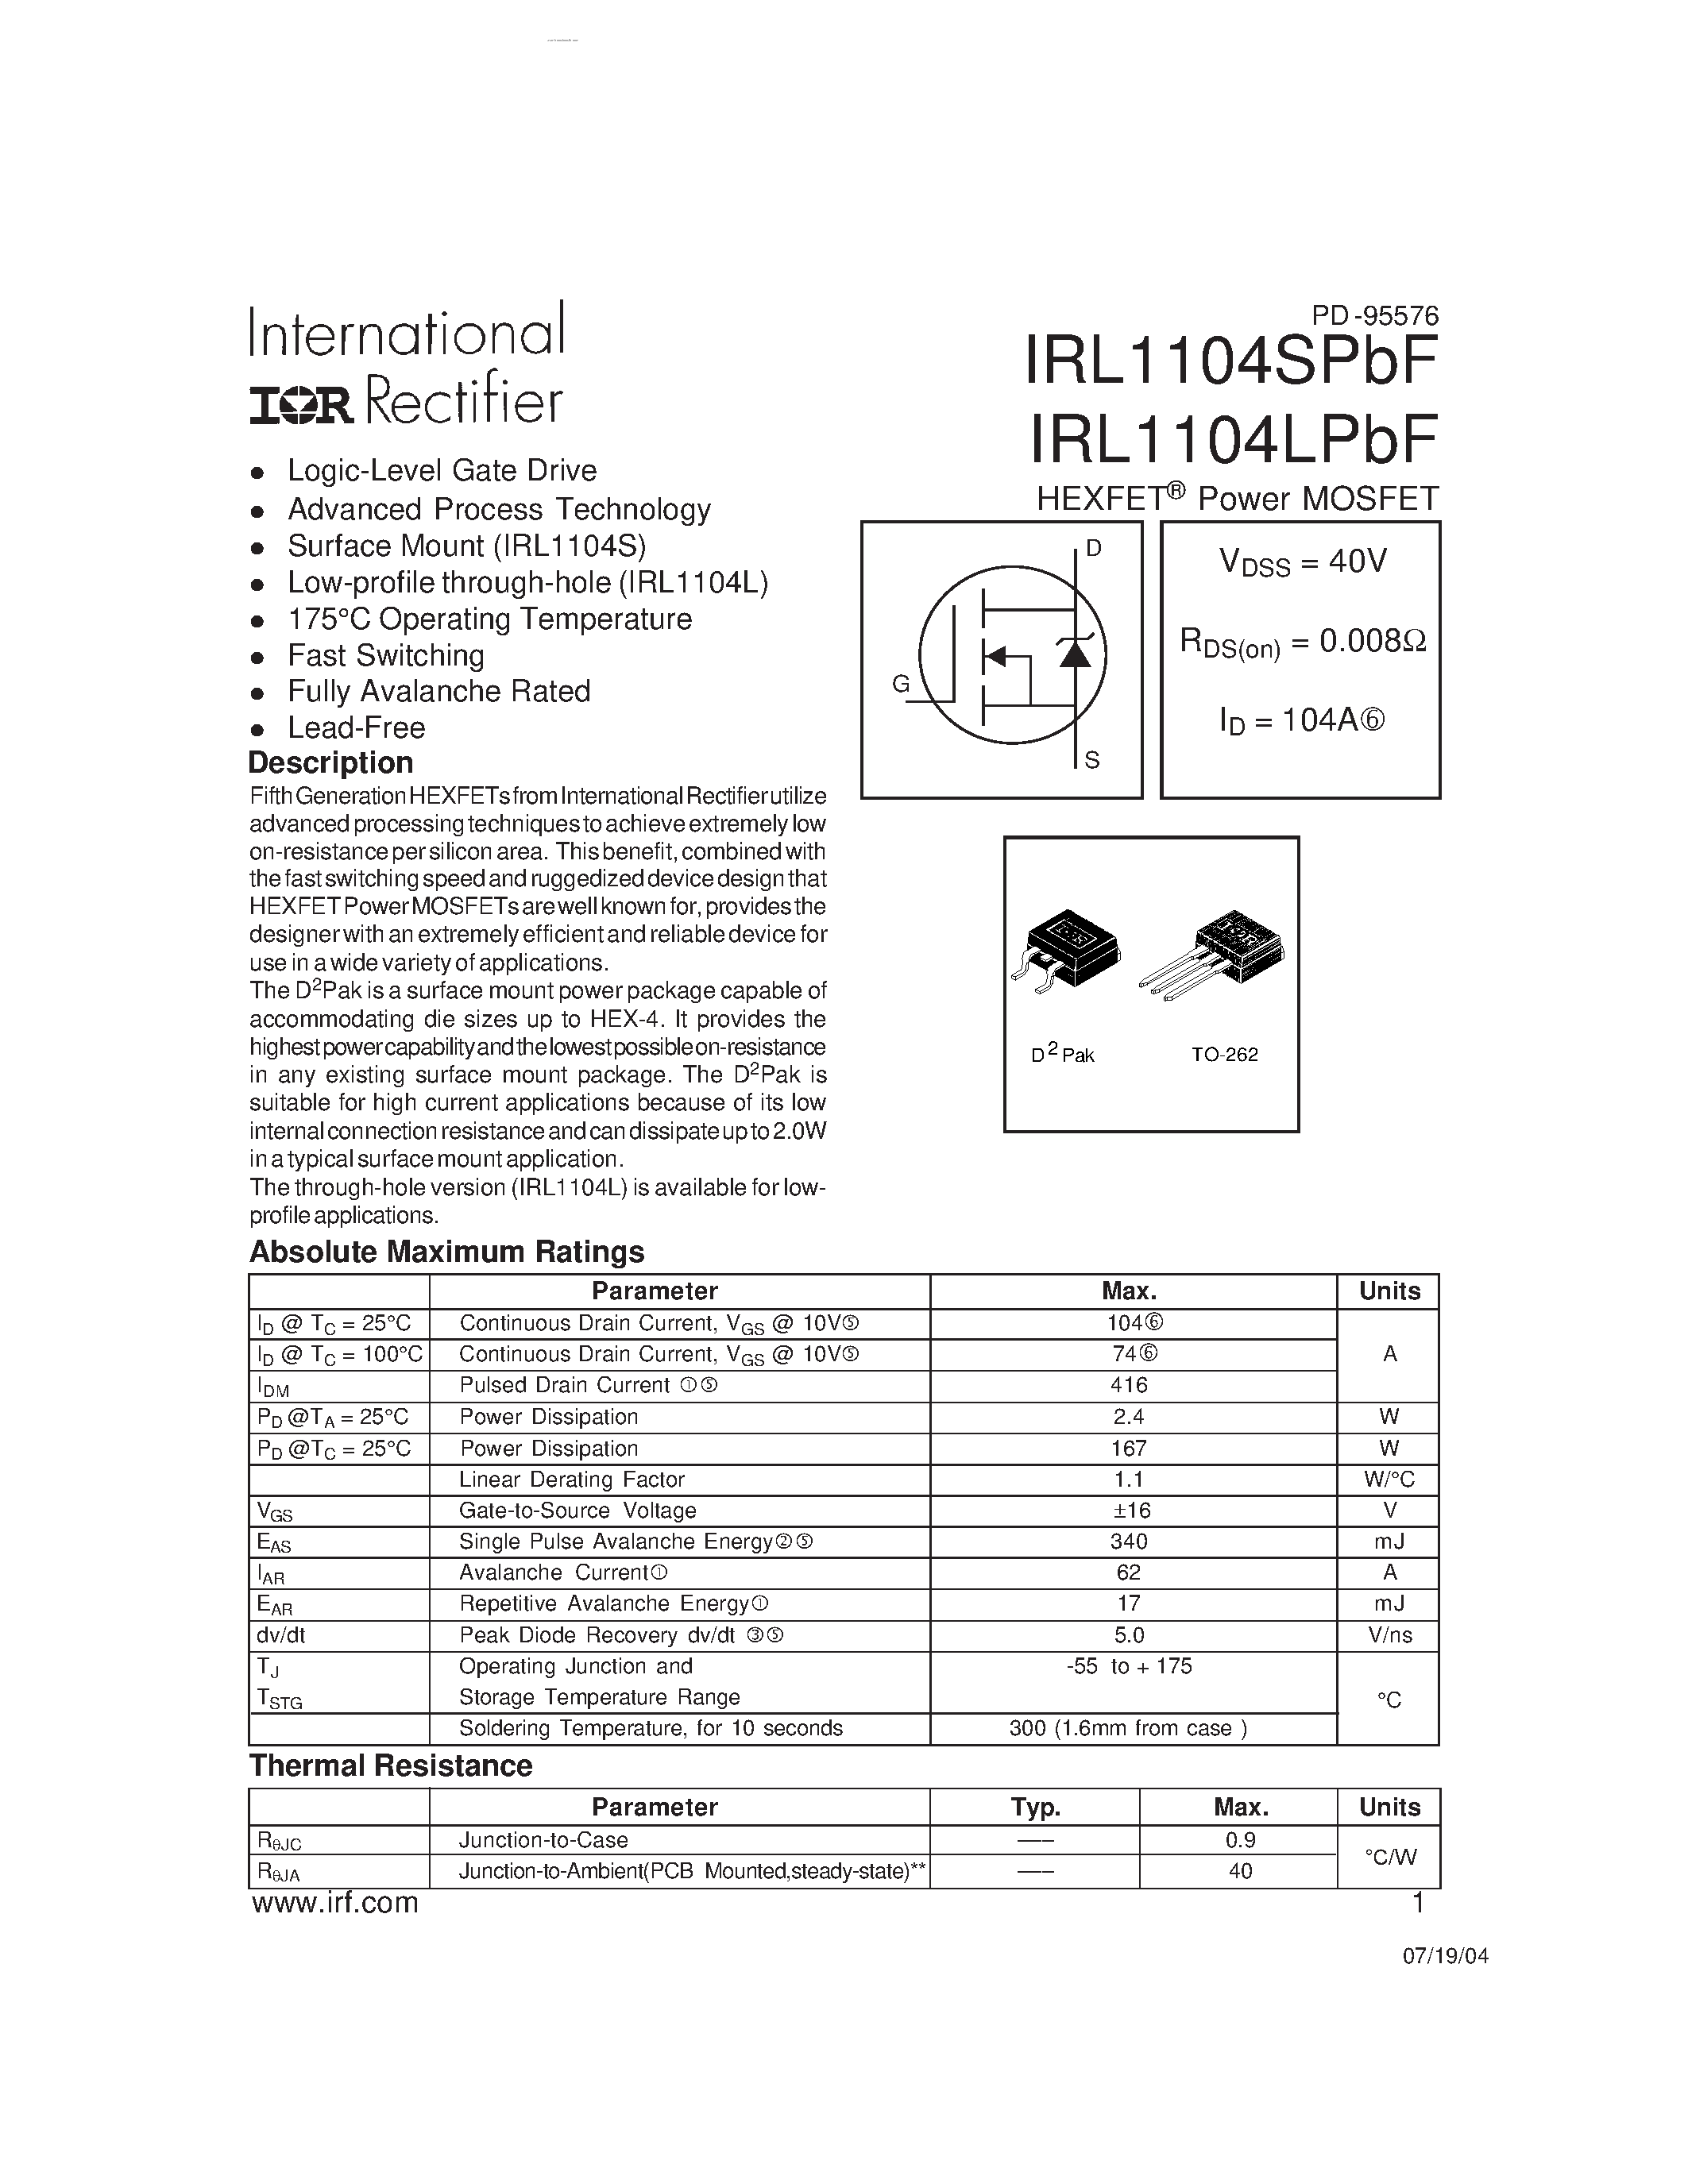 Datasheet IRL1104LPBF - HEXFET Power MOSFET page 1